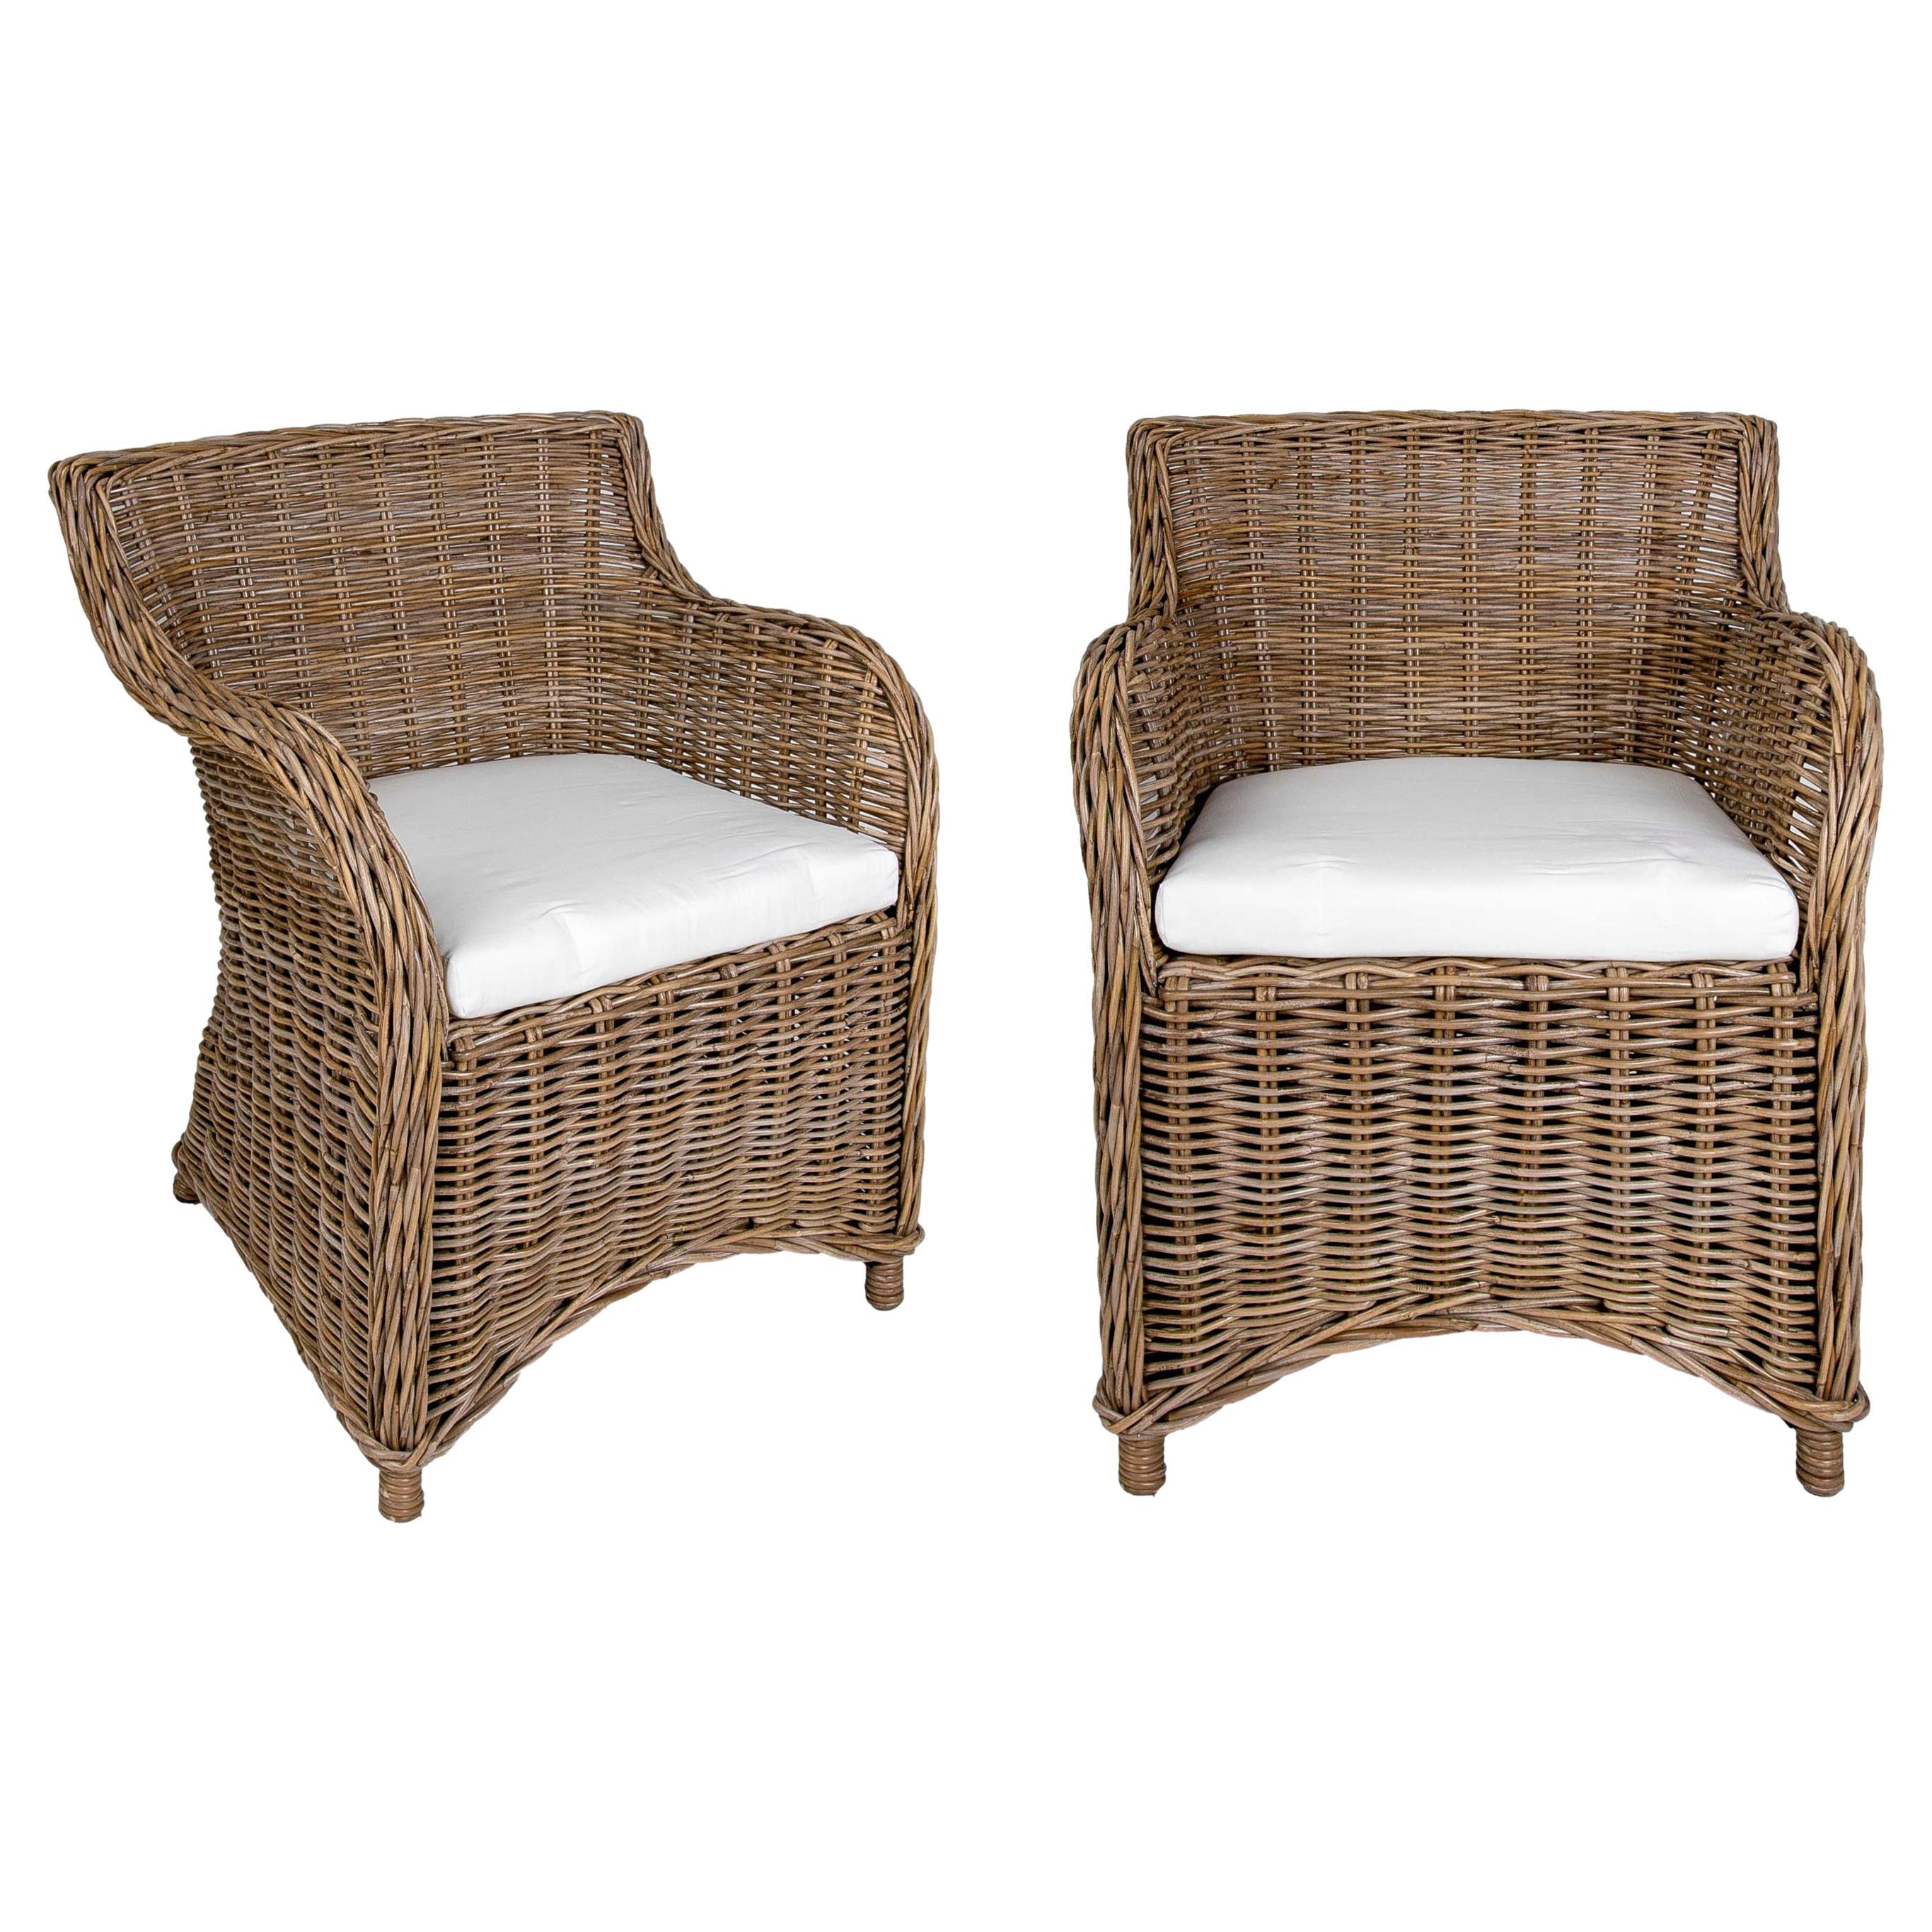 Pair of Rattan Garden Chairs with Cushions in Greyish Tone For Sale